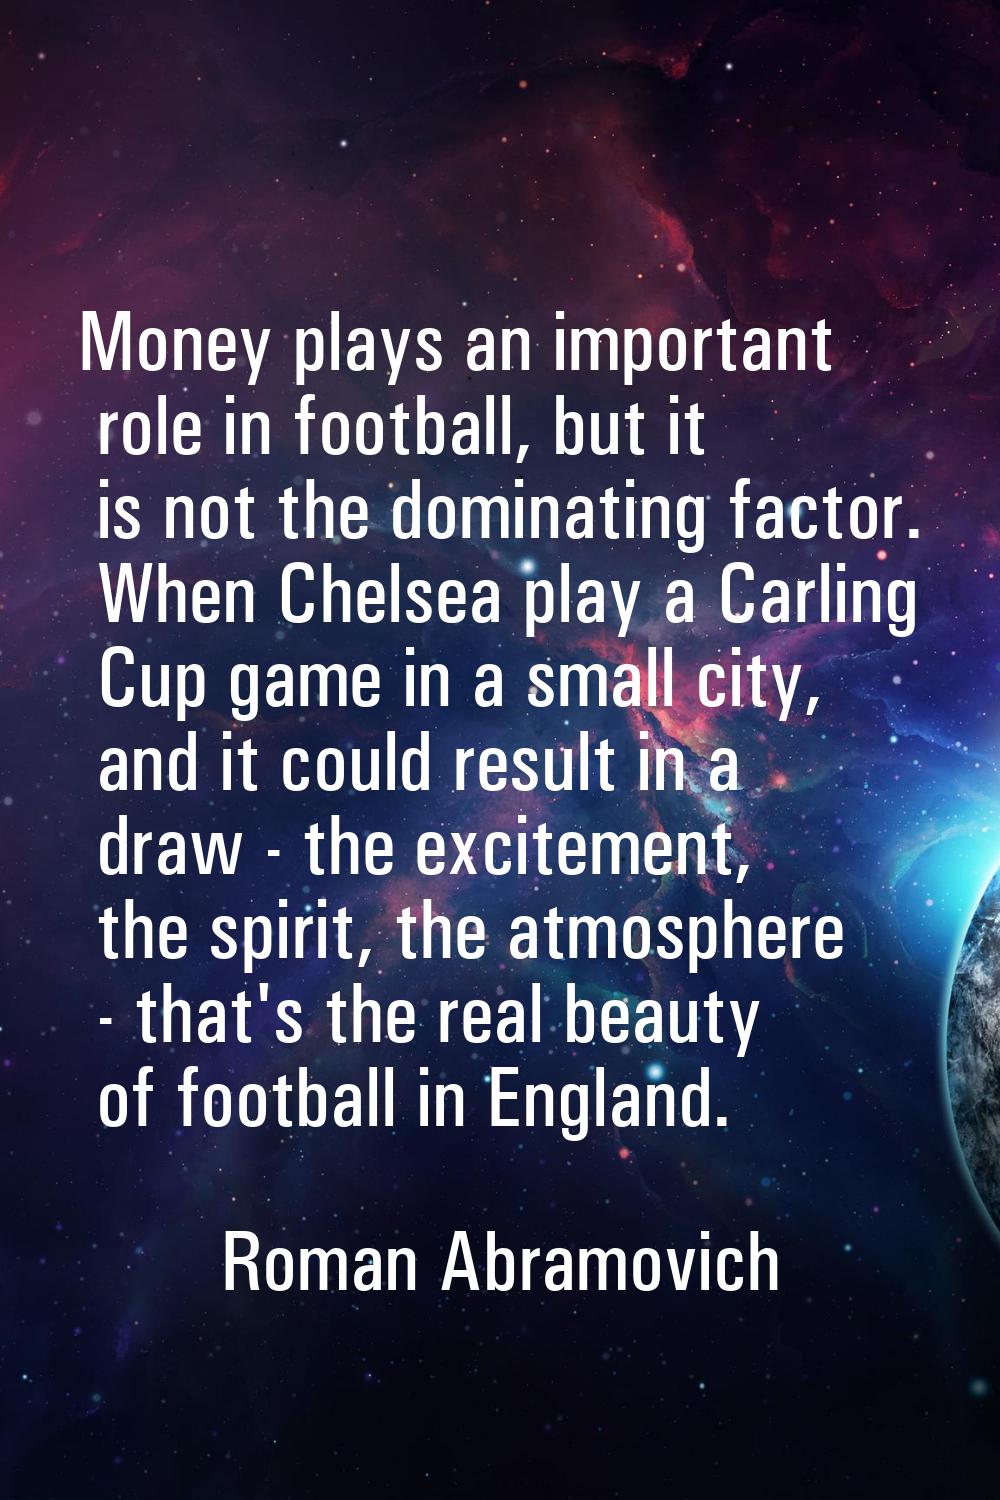 Money plays an important role in football, but it is not the dominating factor. When Chelsea play a